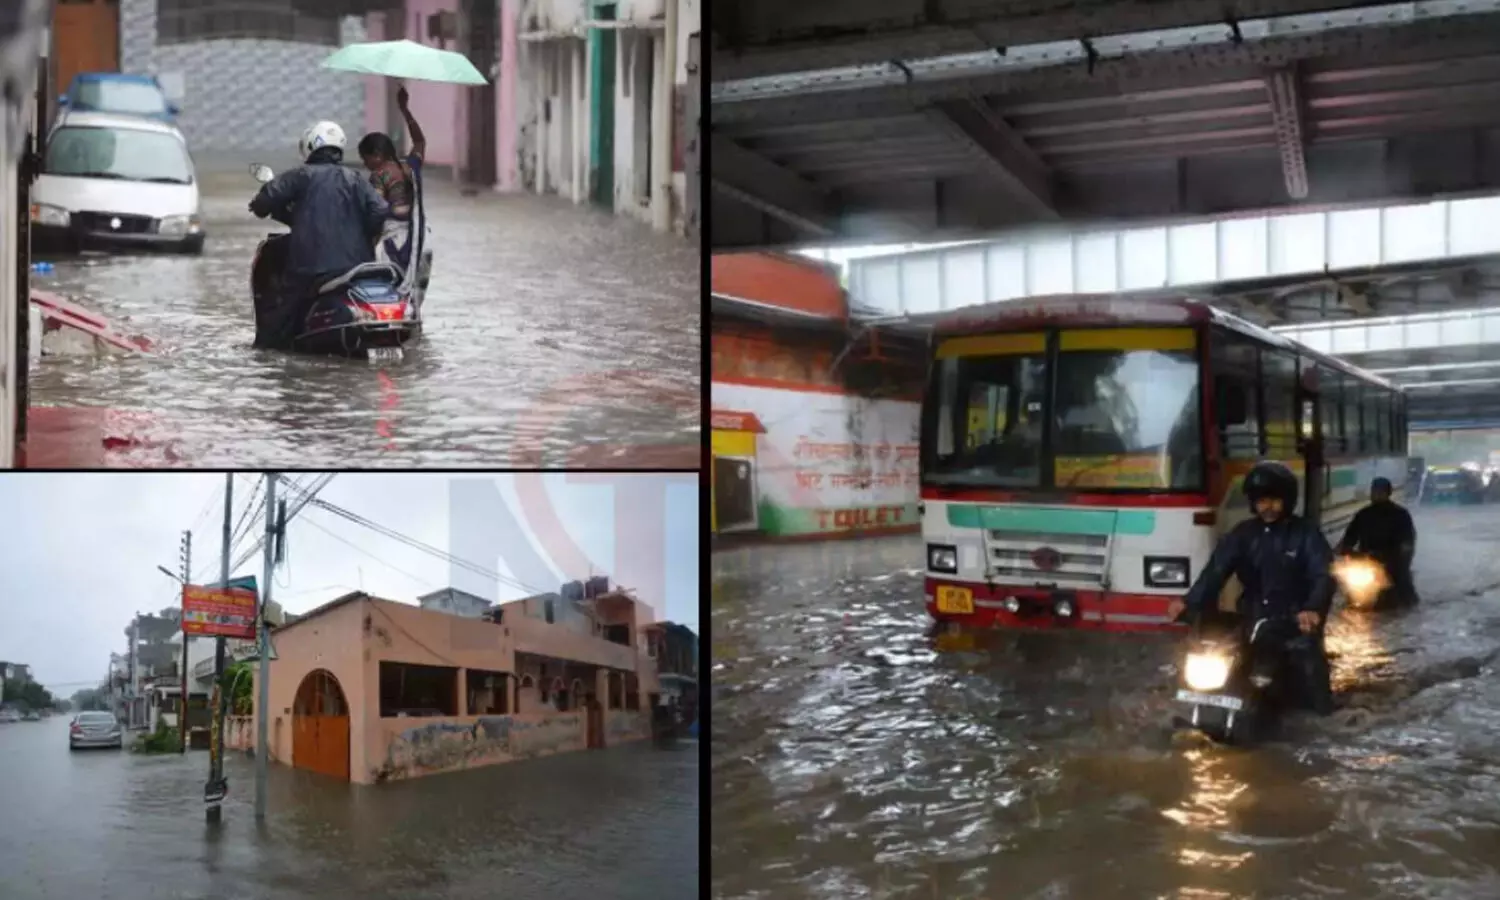 Lucknow Weather Update: Incessant rains bring life to standstill; Roads waterlogged, lanes submerged